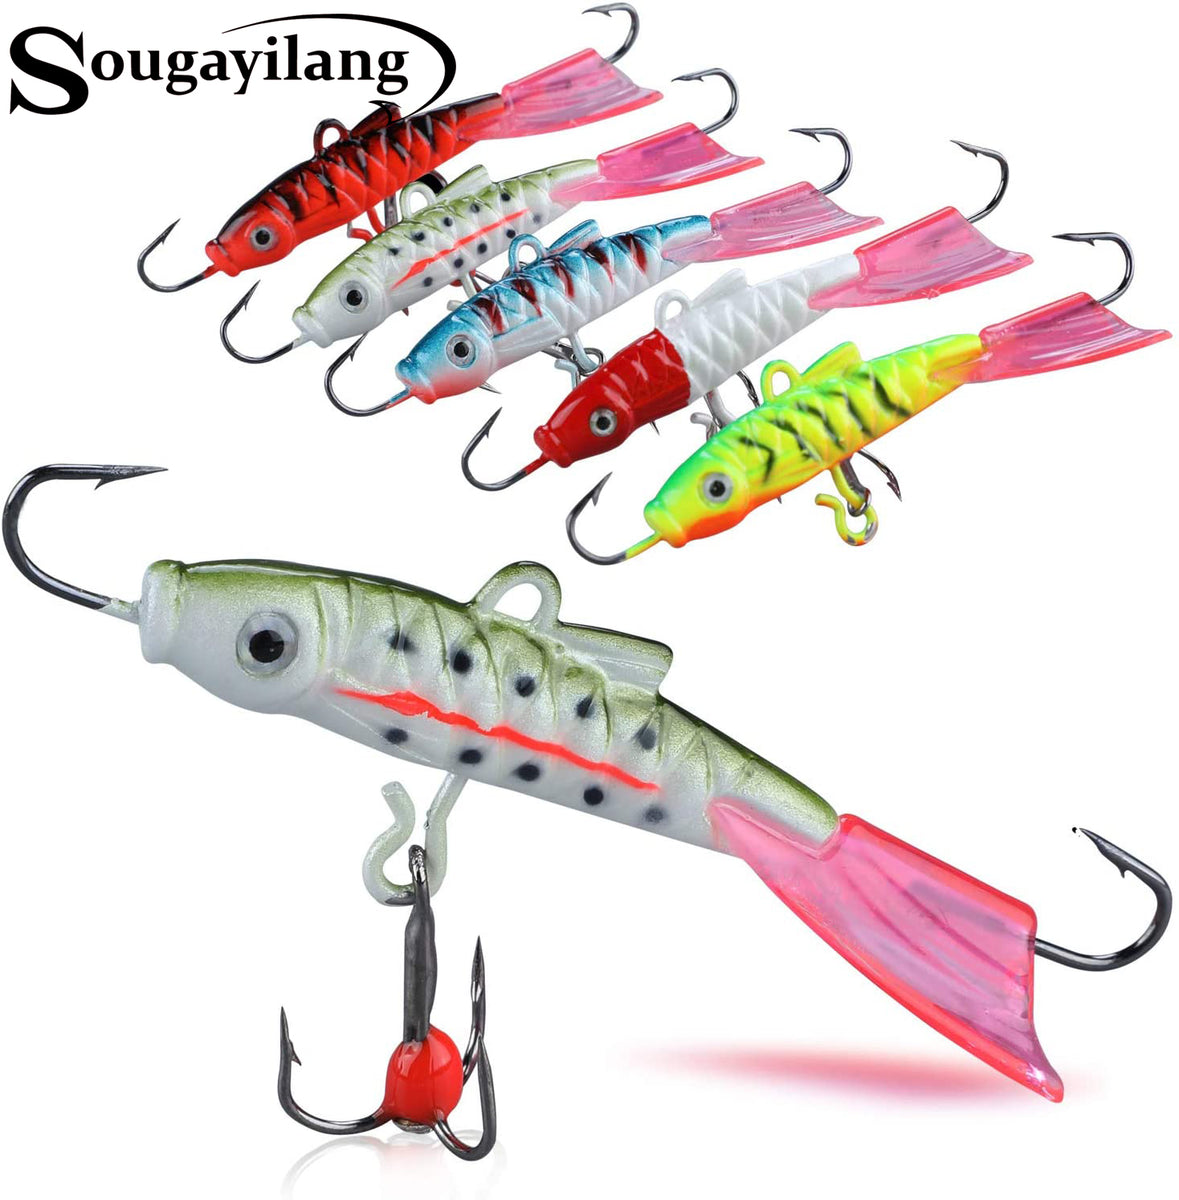 Fishing Lures 10 pcs Fishing Spoons Sequin Metal Lures Fishing Lure for  Trout Pike Bass Salmon Crappie Walleye, Fishing Accessories with Treble